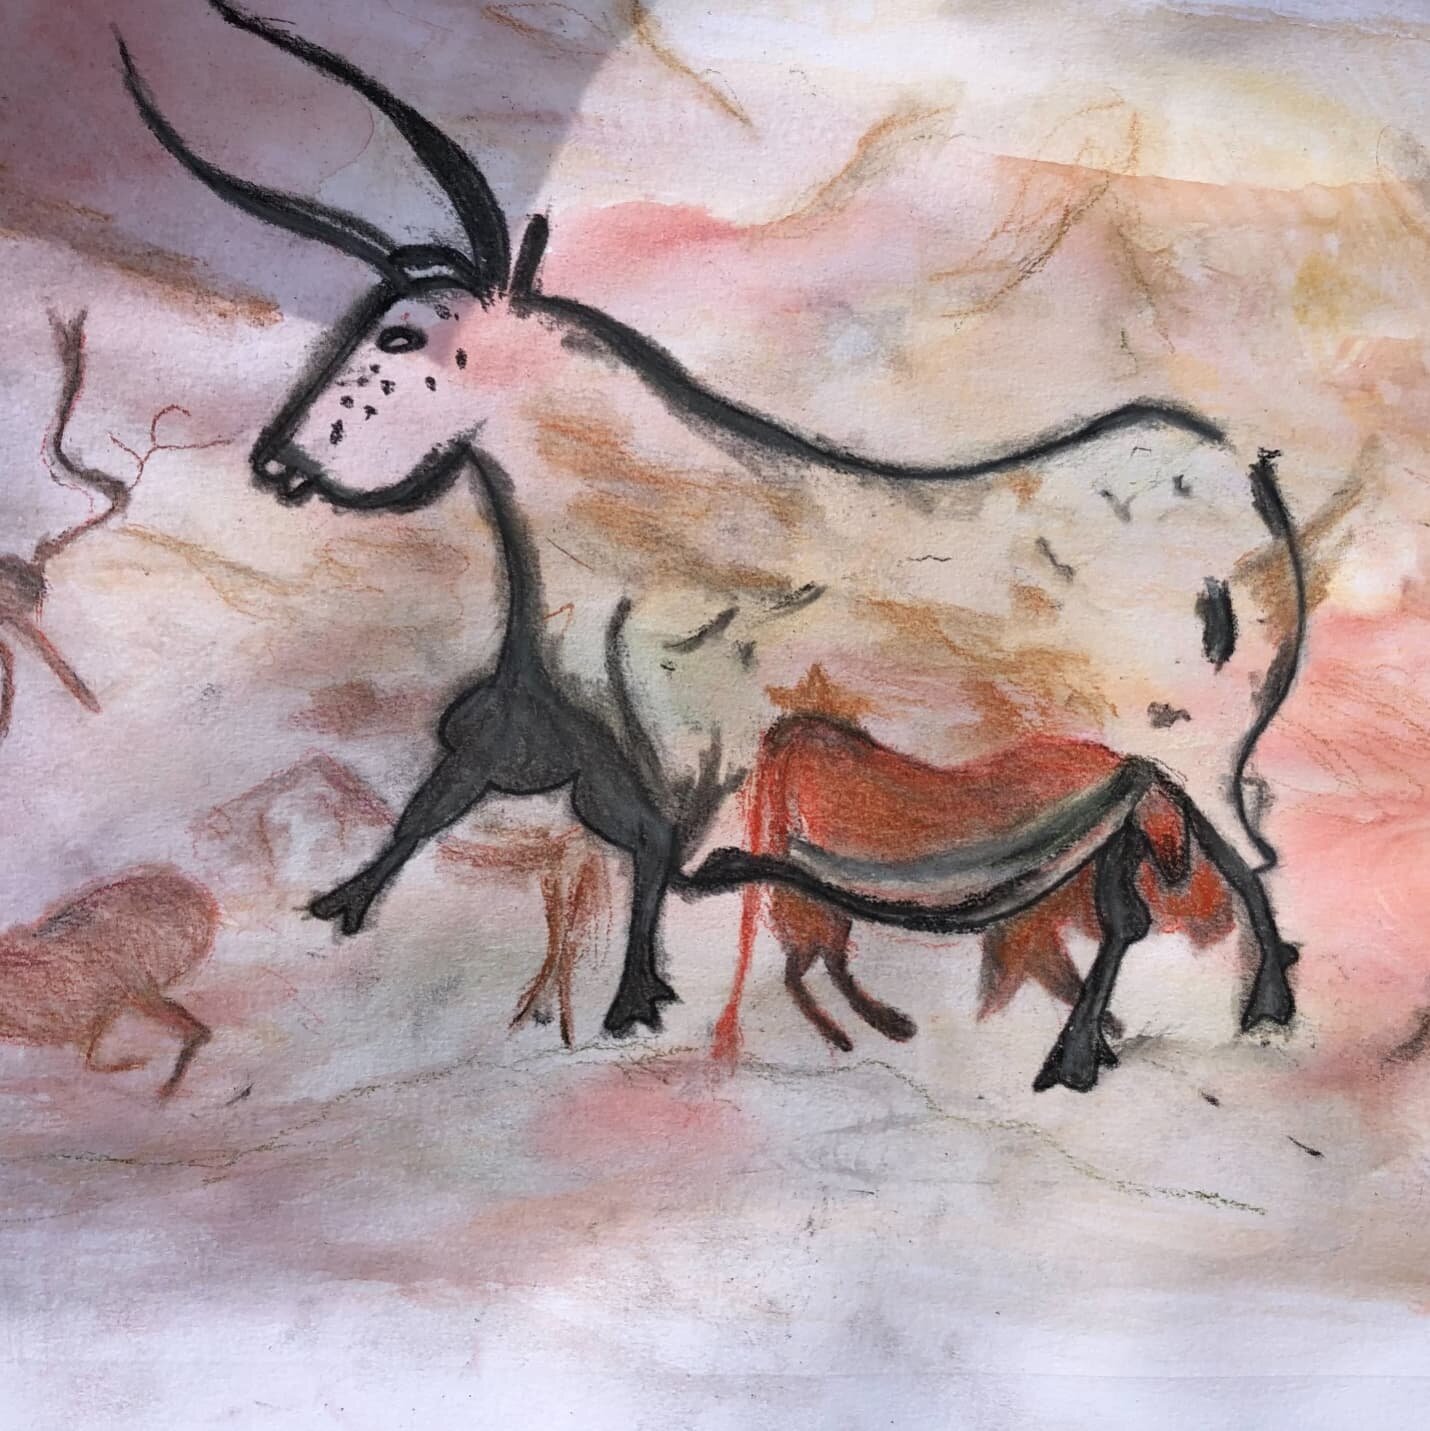 Creative Aging: Animalia started off wonderfully last week as students explored the subject of cave art drawings and paintings, one of humanity's first recorded instances of artmaking and storytelling. Inspired by their studies, students created thei